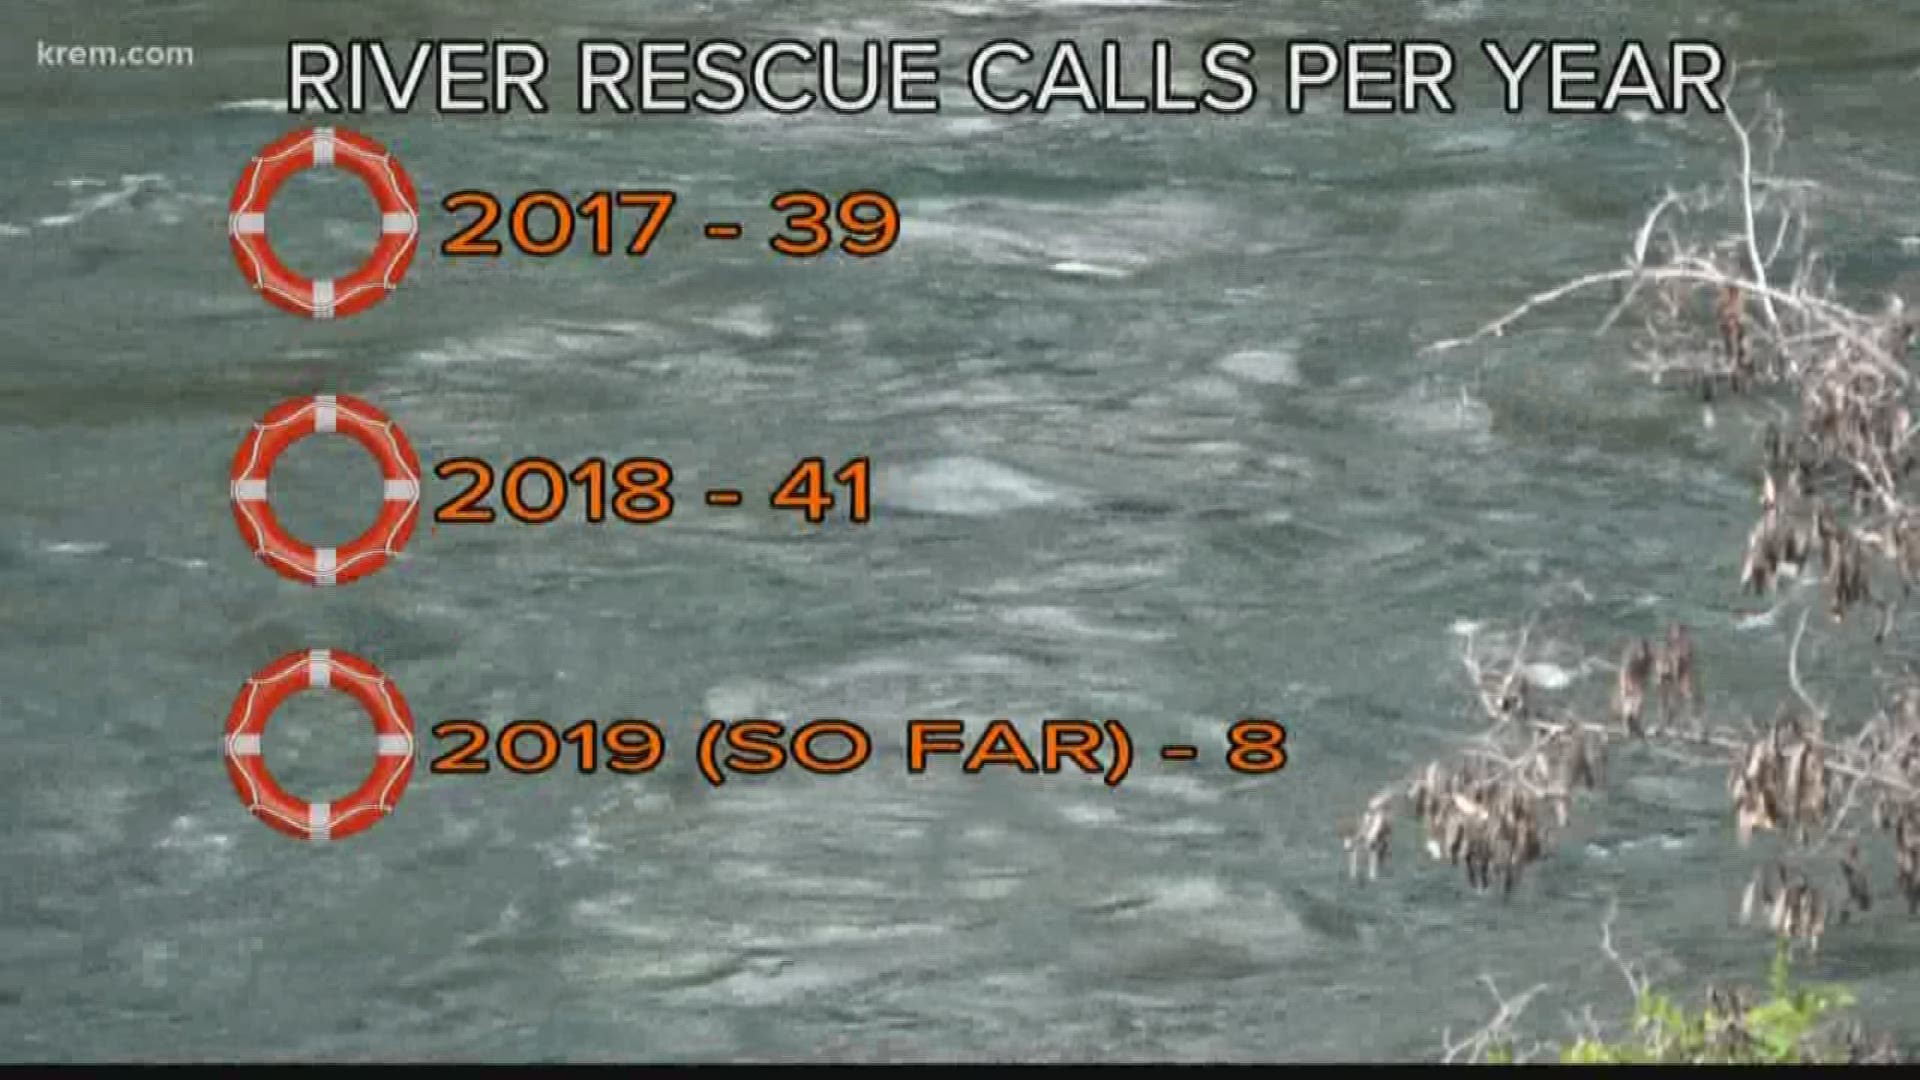 Spokane area firefighters have already responded to eight water rescue calls in 2019.